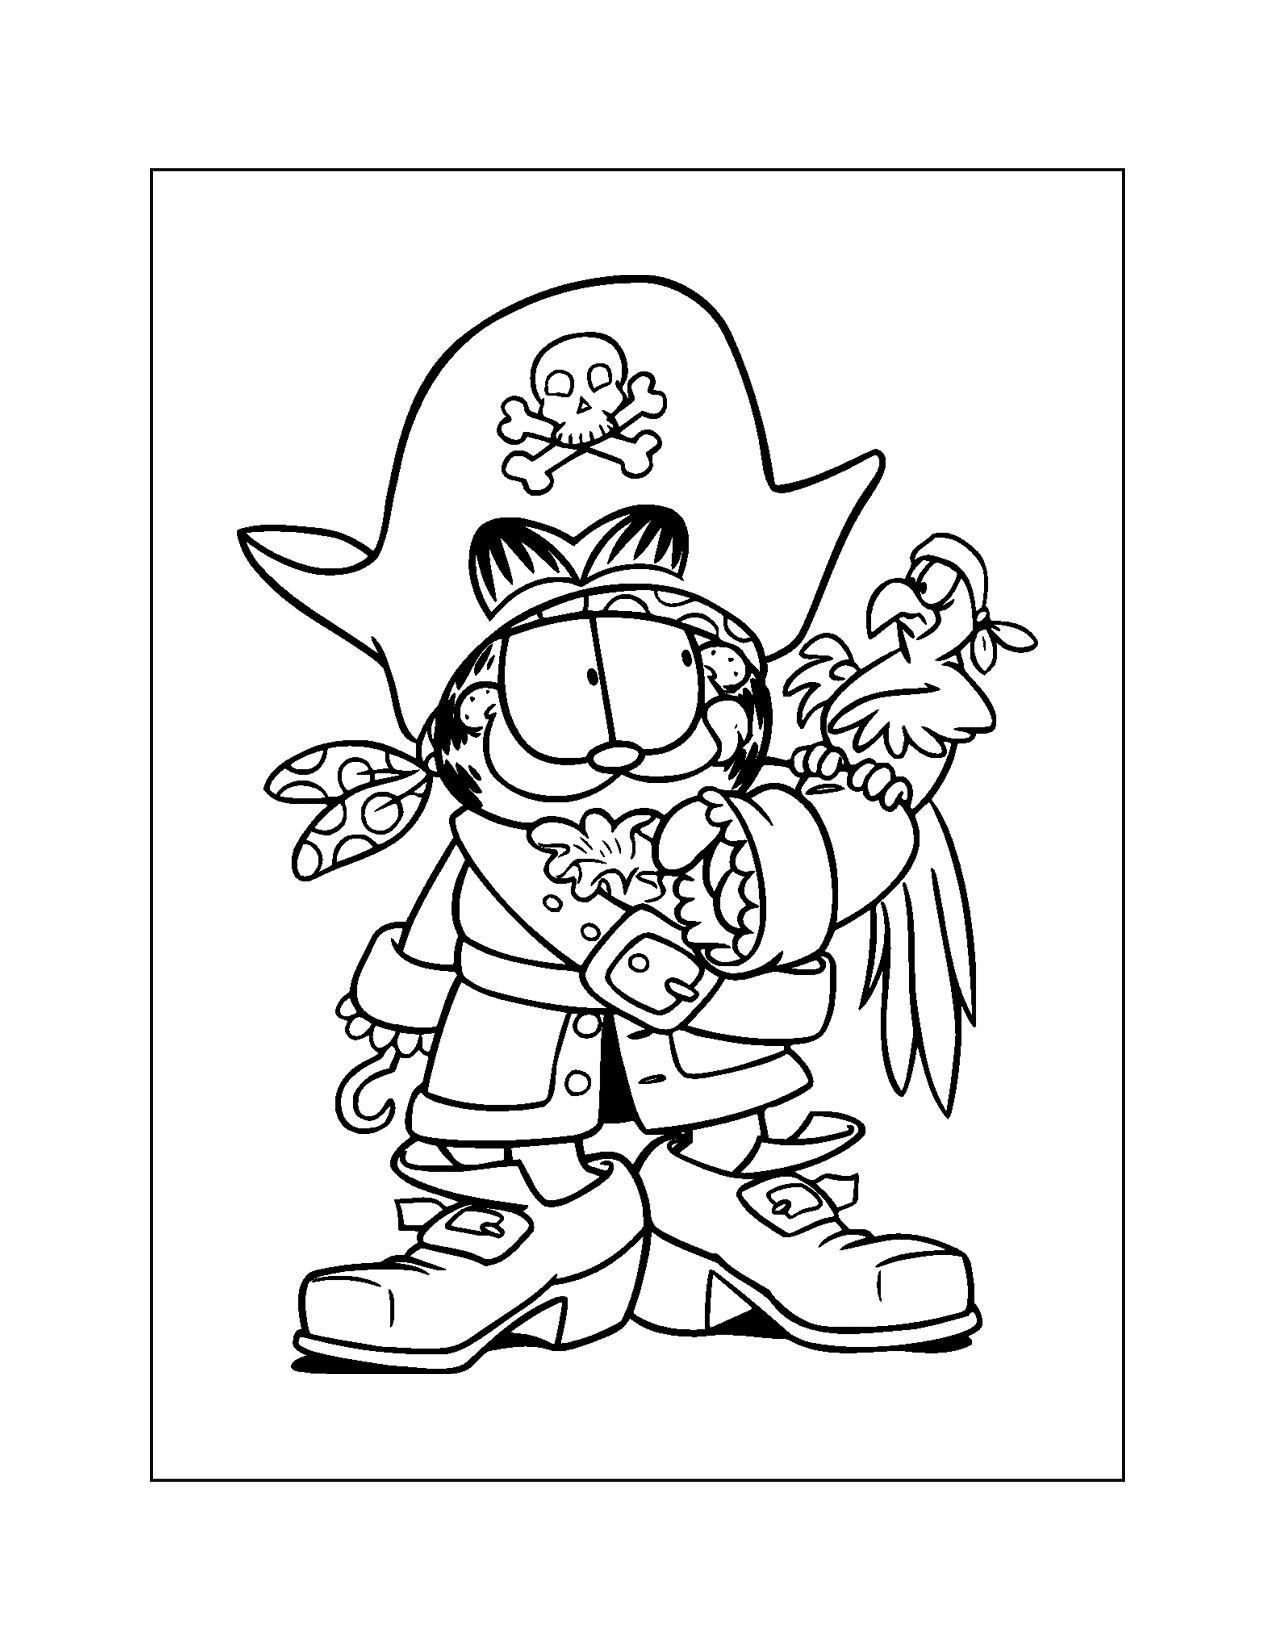 Pirate Garfield With Parrot Coloring Page